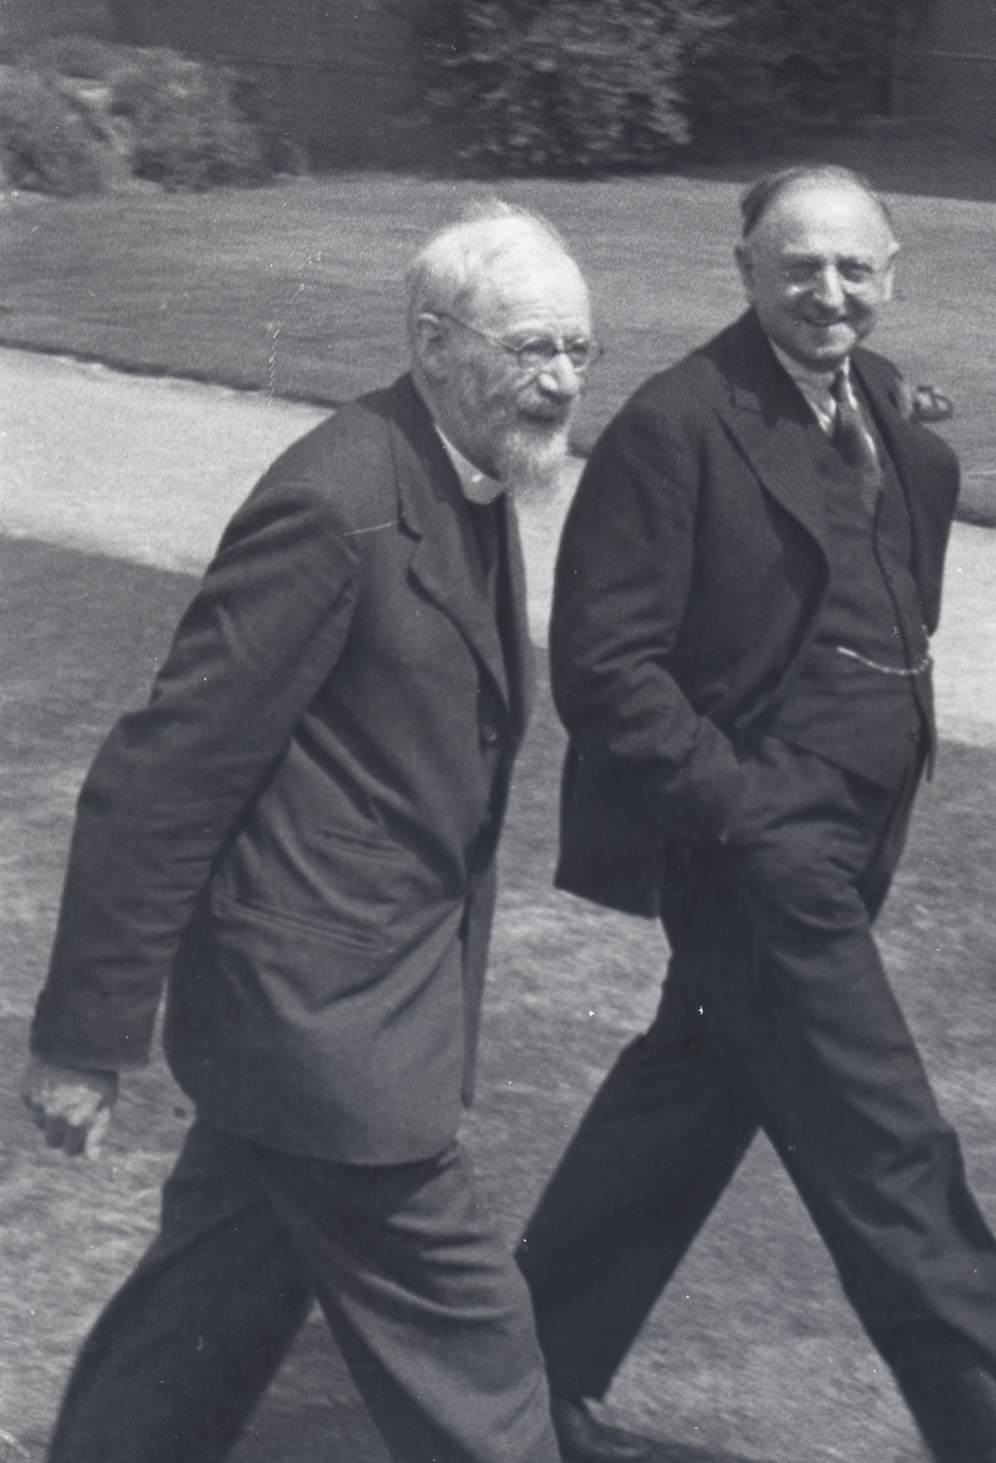 Canon B H Streeter (left) with Frank Buchman (right)